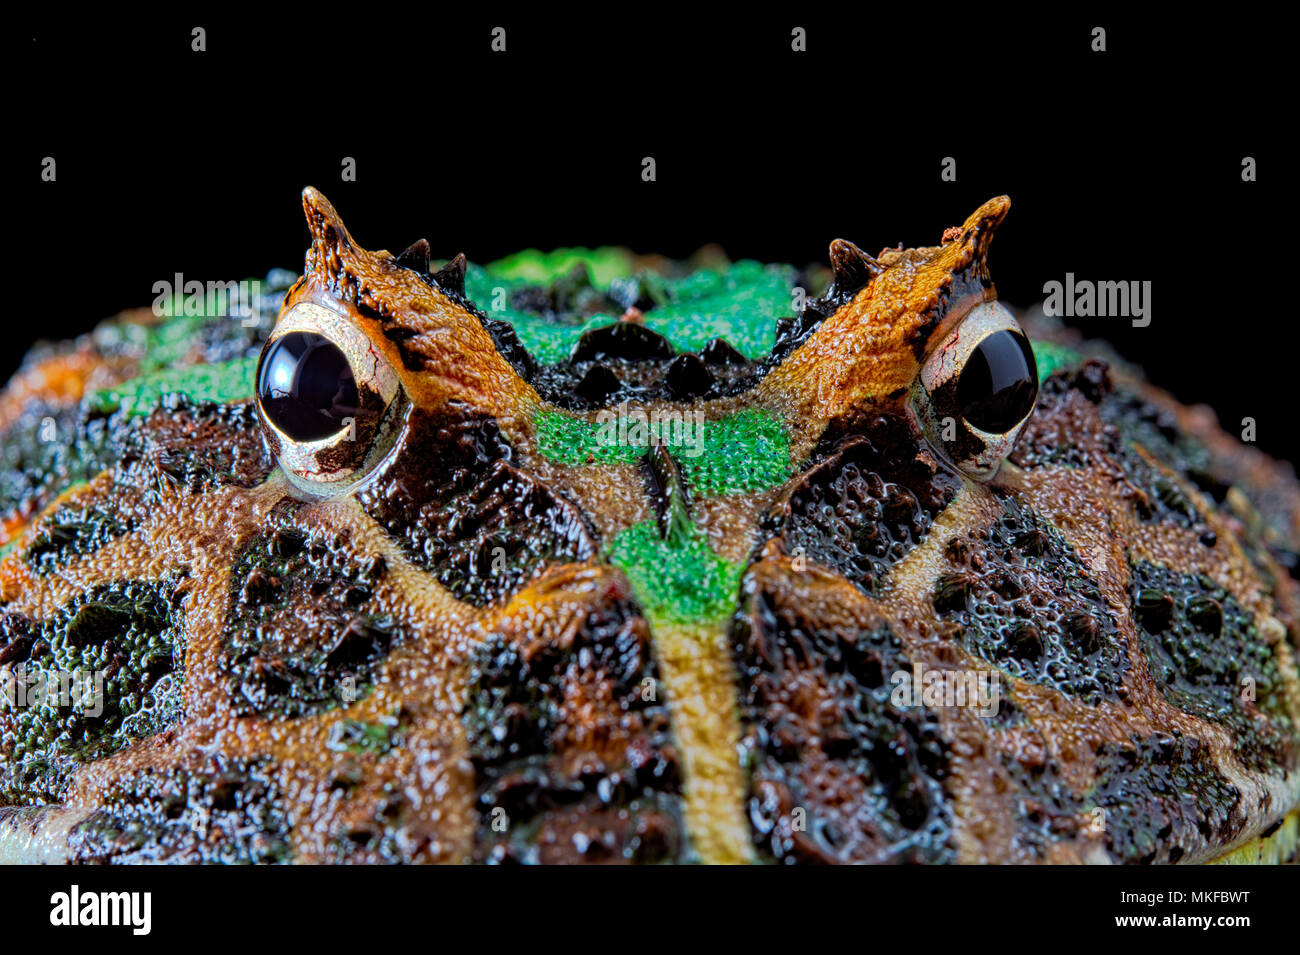 Portrait of Pacman frog or Chacoan horned frog (Ceratophrys cranwelli) on black background Stock Photo